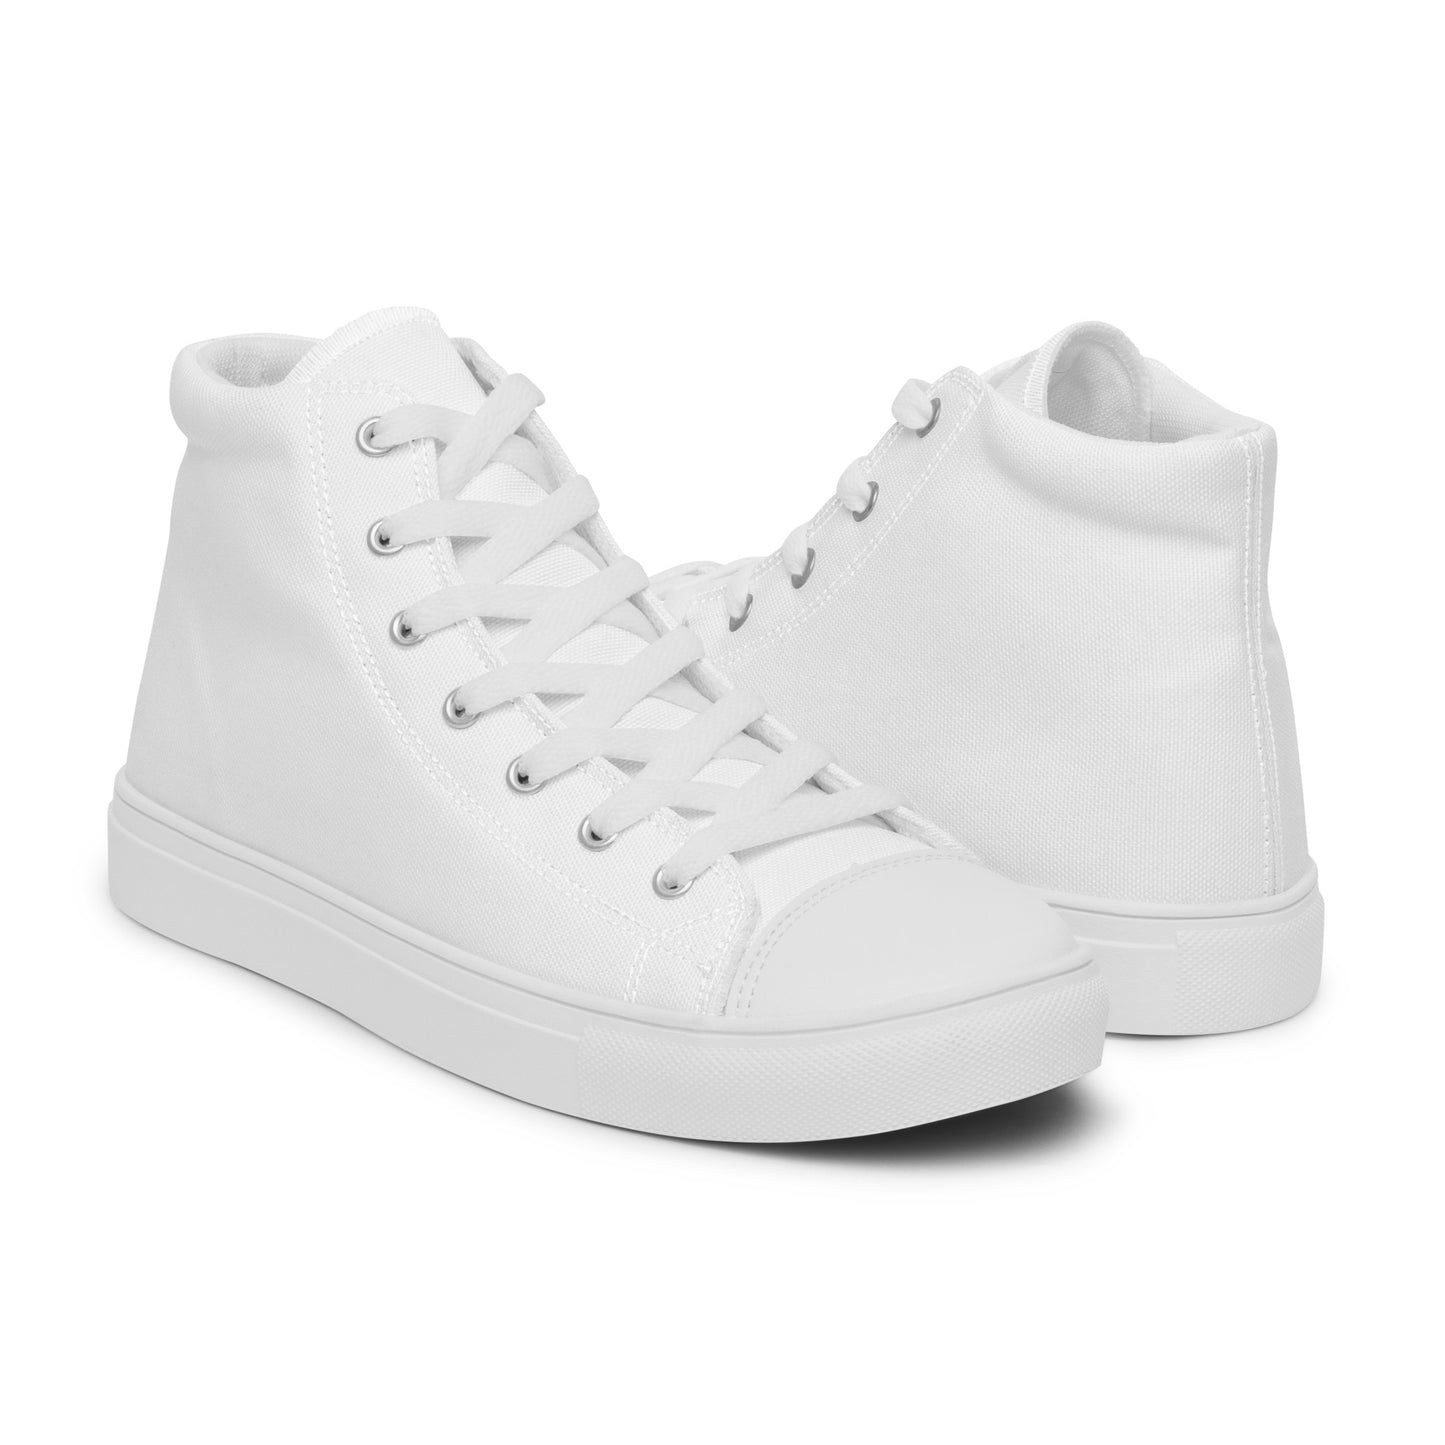 Full White - Sustainably Made Men's High Top Canvas Shoes